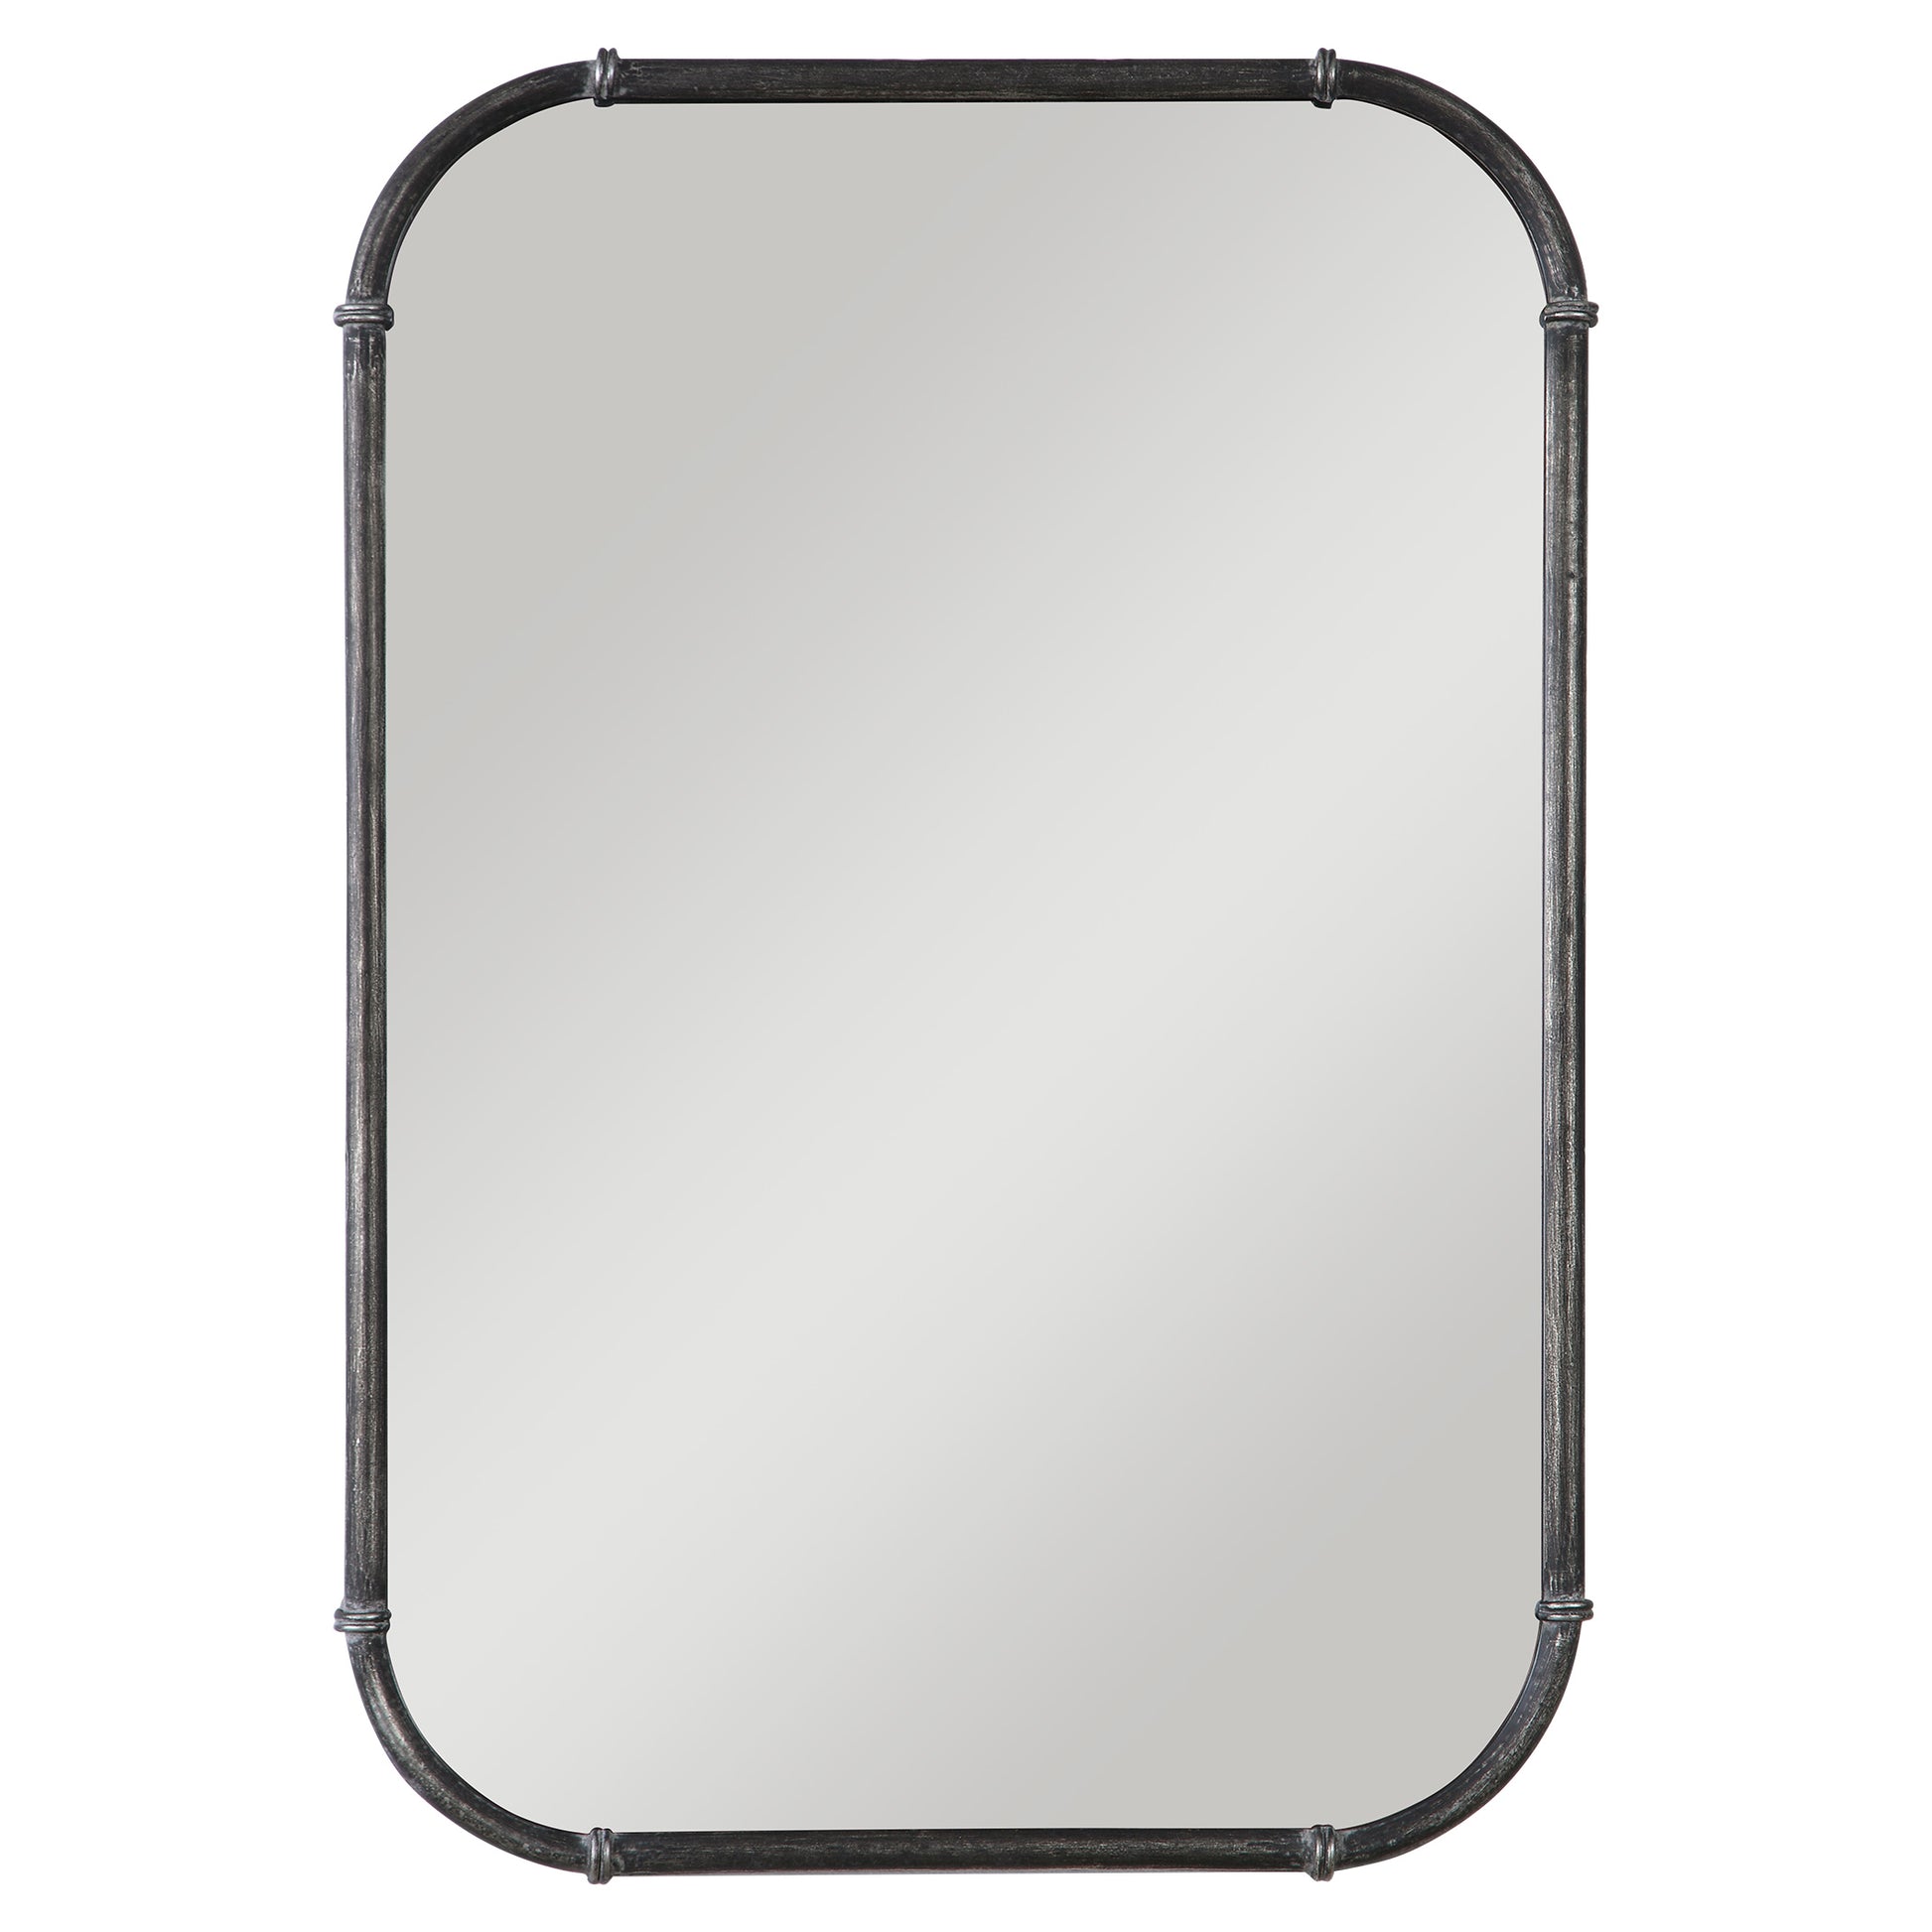 Rounded corners soften frame By Modish Store | Mirrors | Modishstore - 2